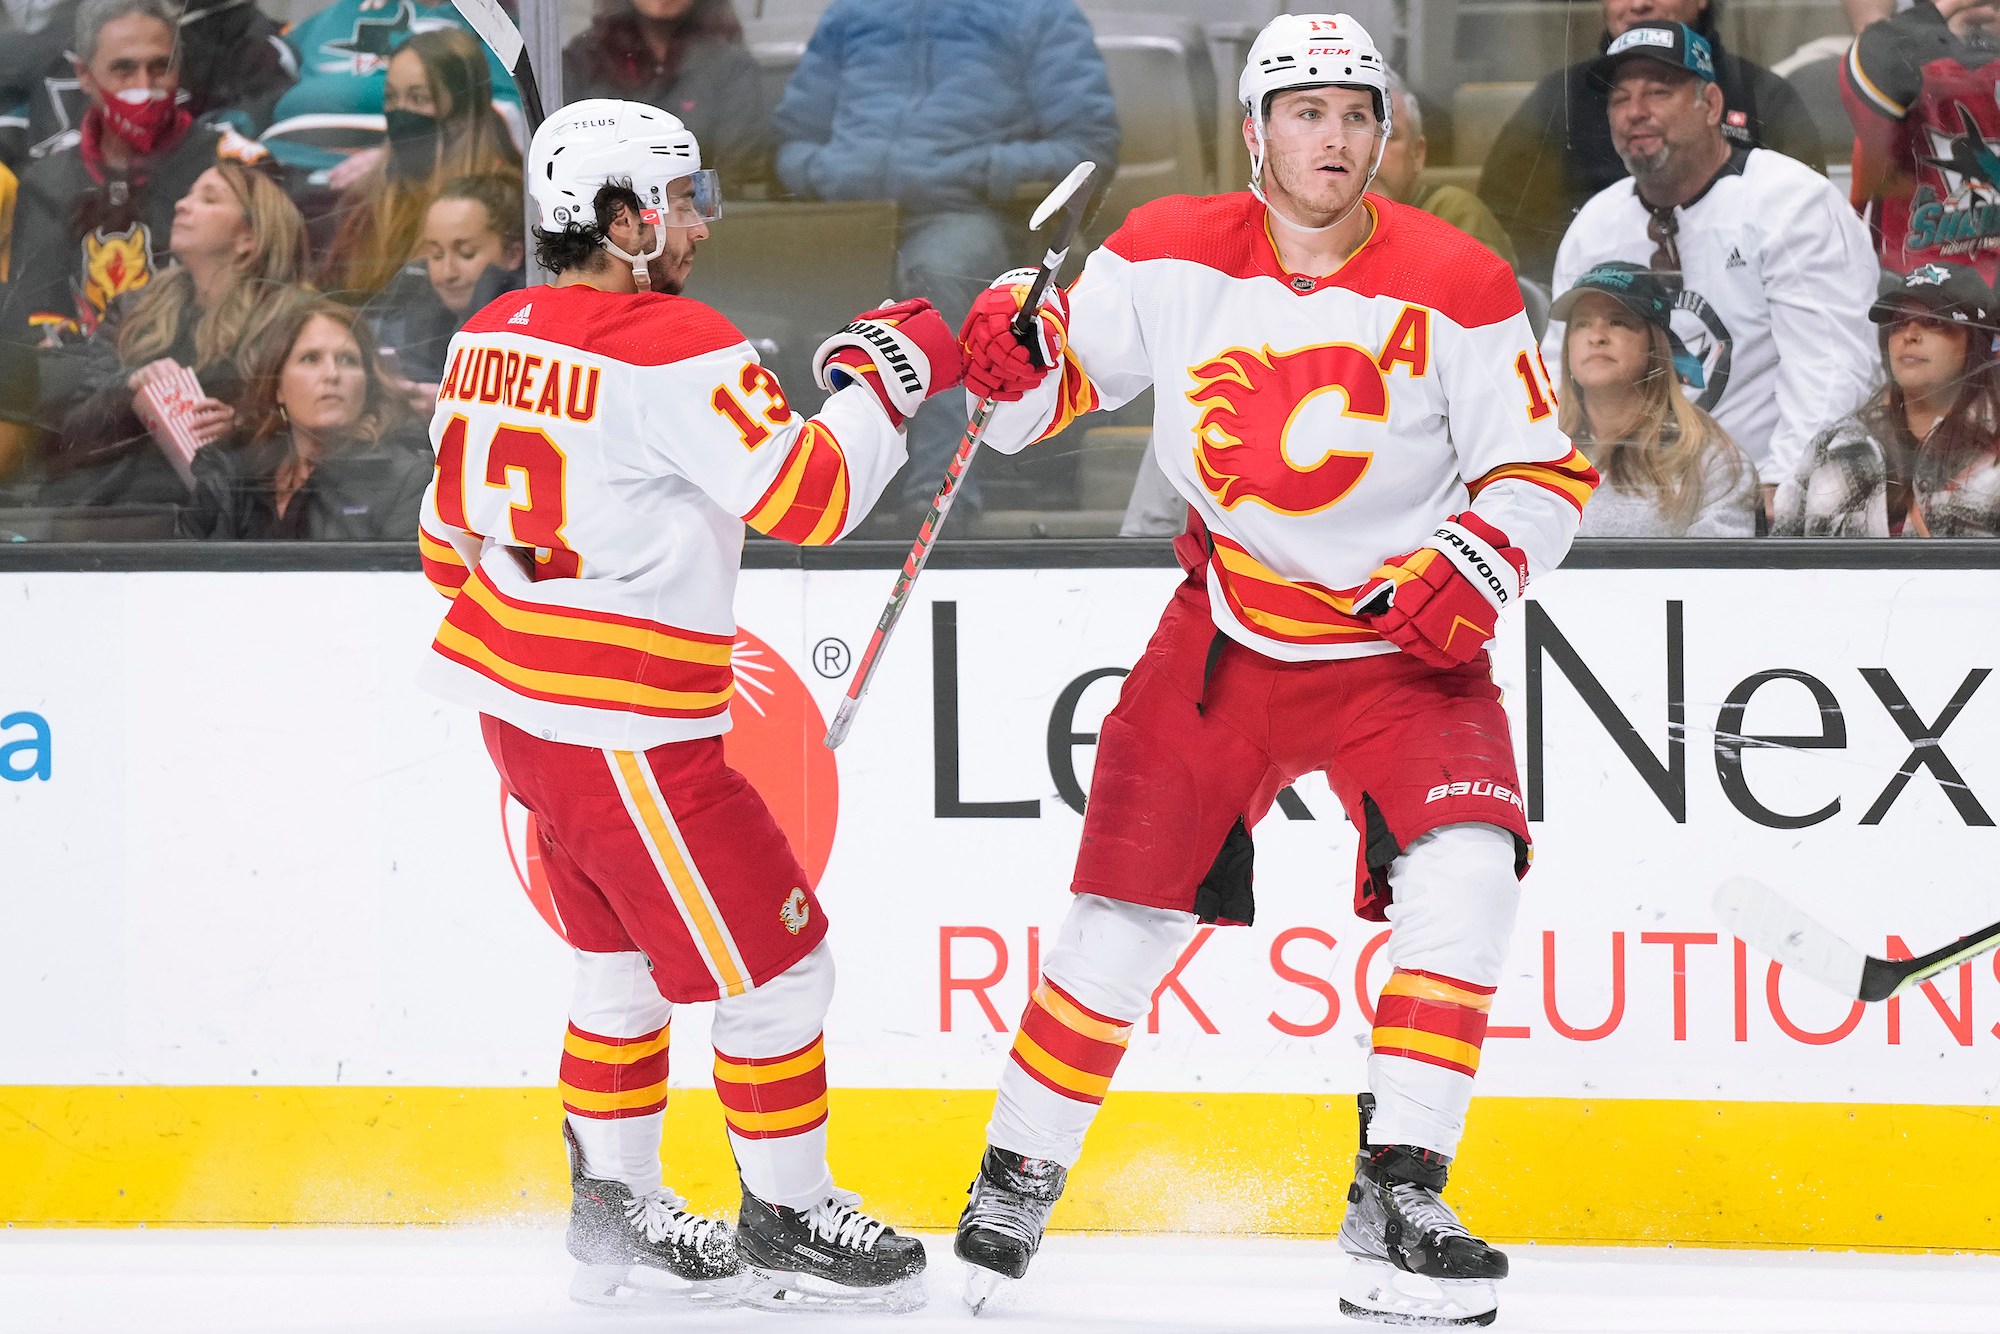 SAN JOSE, CALIFORNIA - APRIL 07: Matthew Tkachuk #19 of the Calgary Flames is congratulated by Johnny Gaudreau #13 after scoring a goal against the San Jose Sharks during the first period of an NHL hockey game at SAP Center on April 07, 2022 in San Jose, California. (Photo by Thearon W. Henderson/Getty Images)